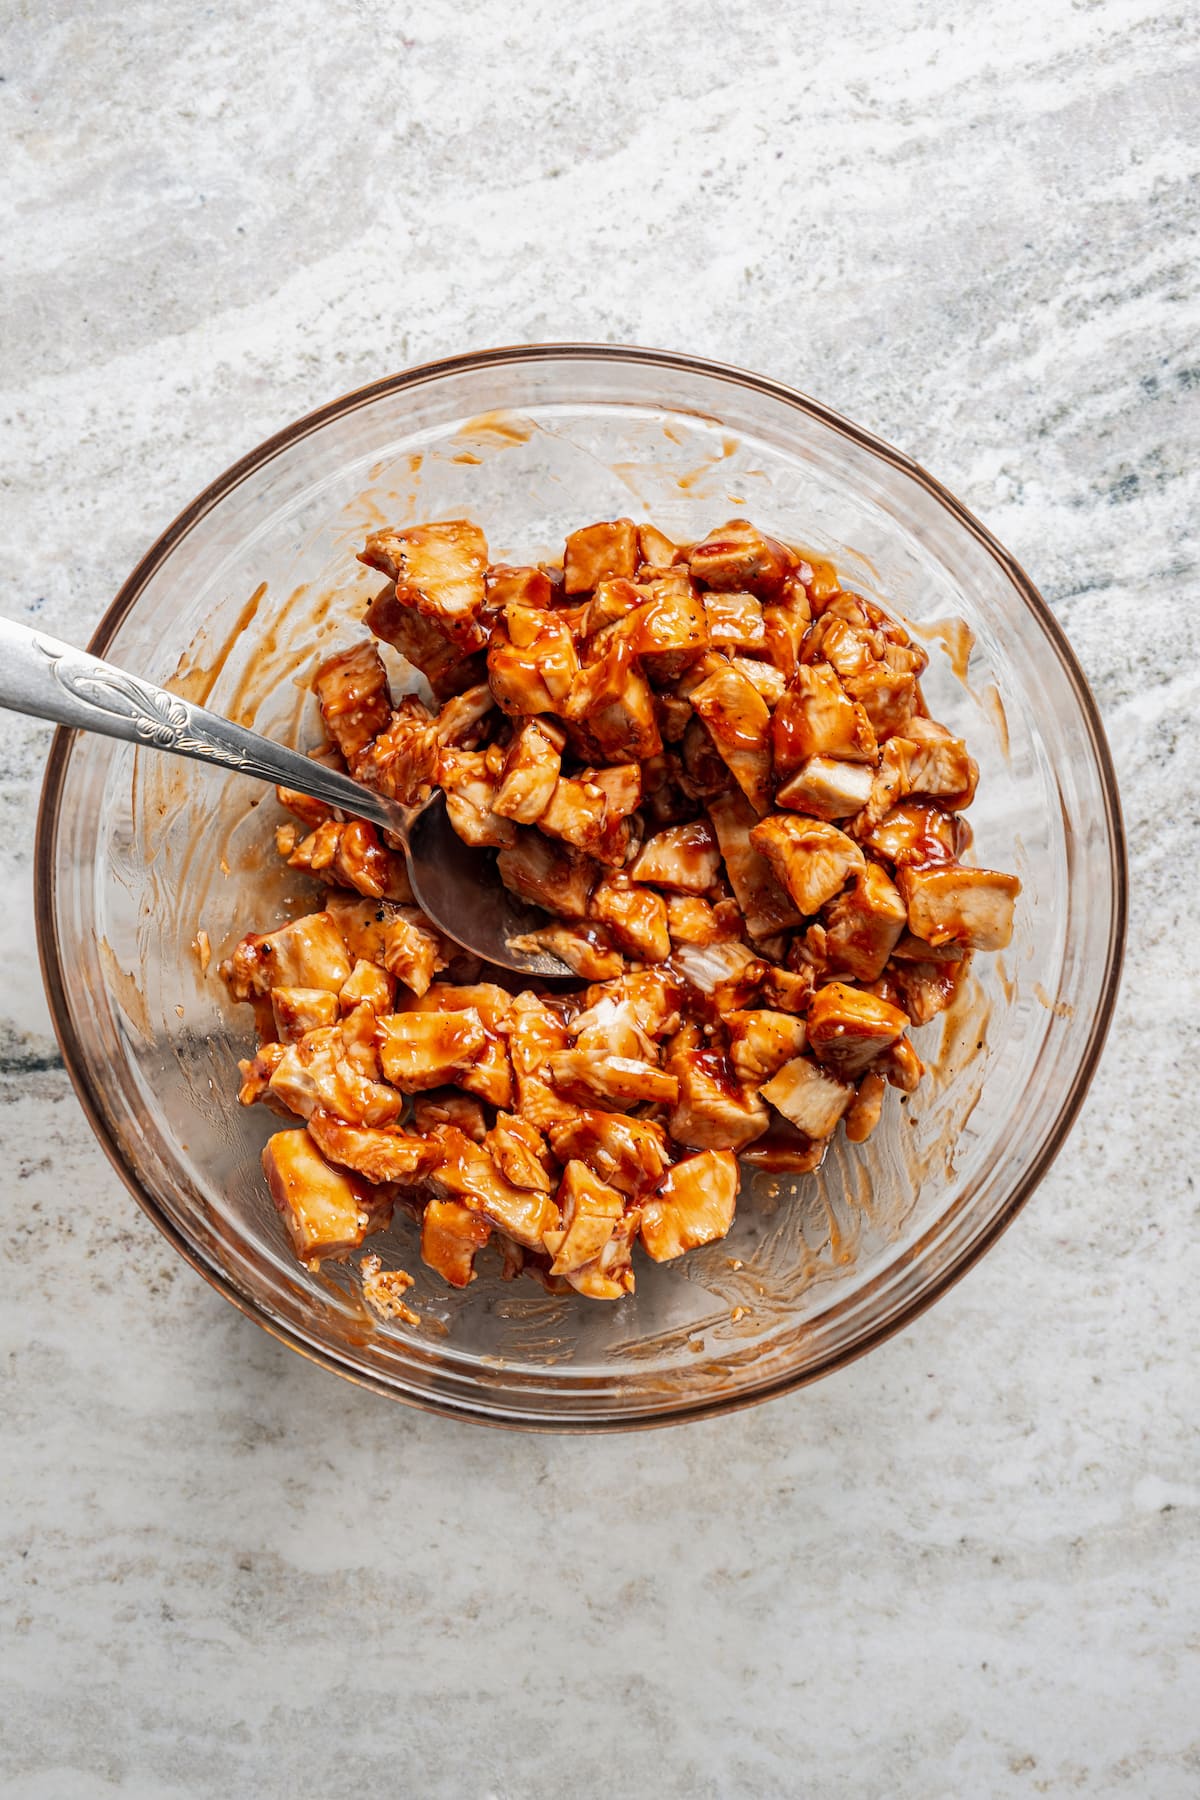 Chicken pieces tossed with BBQ sauce in a glass bowl.